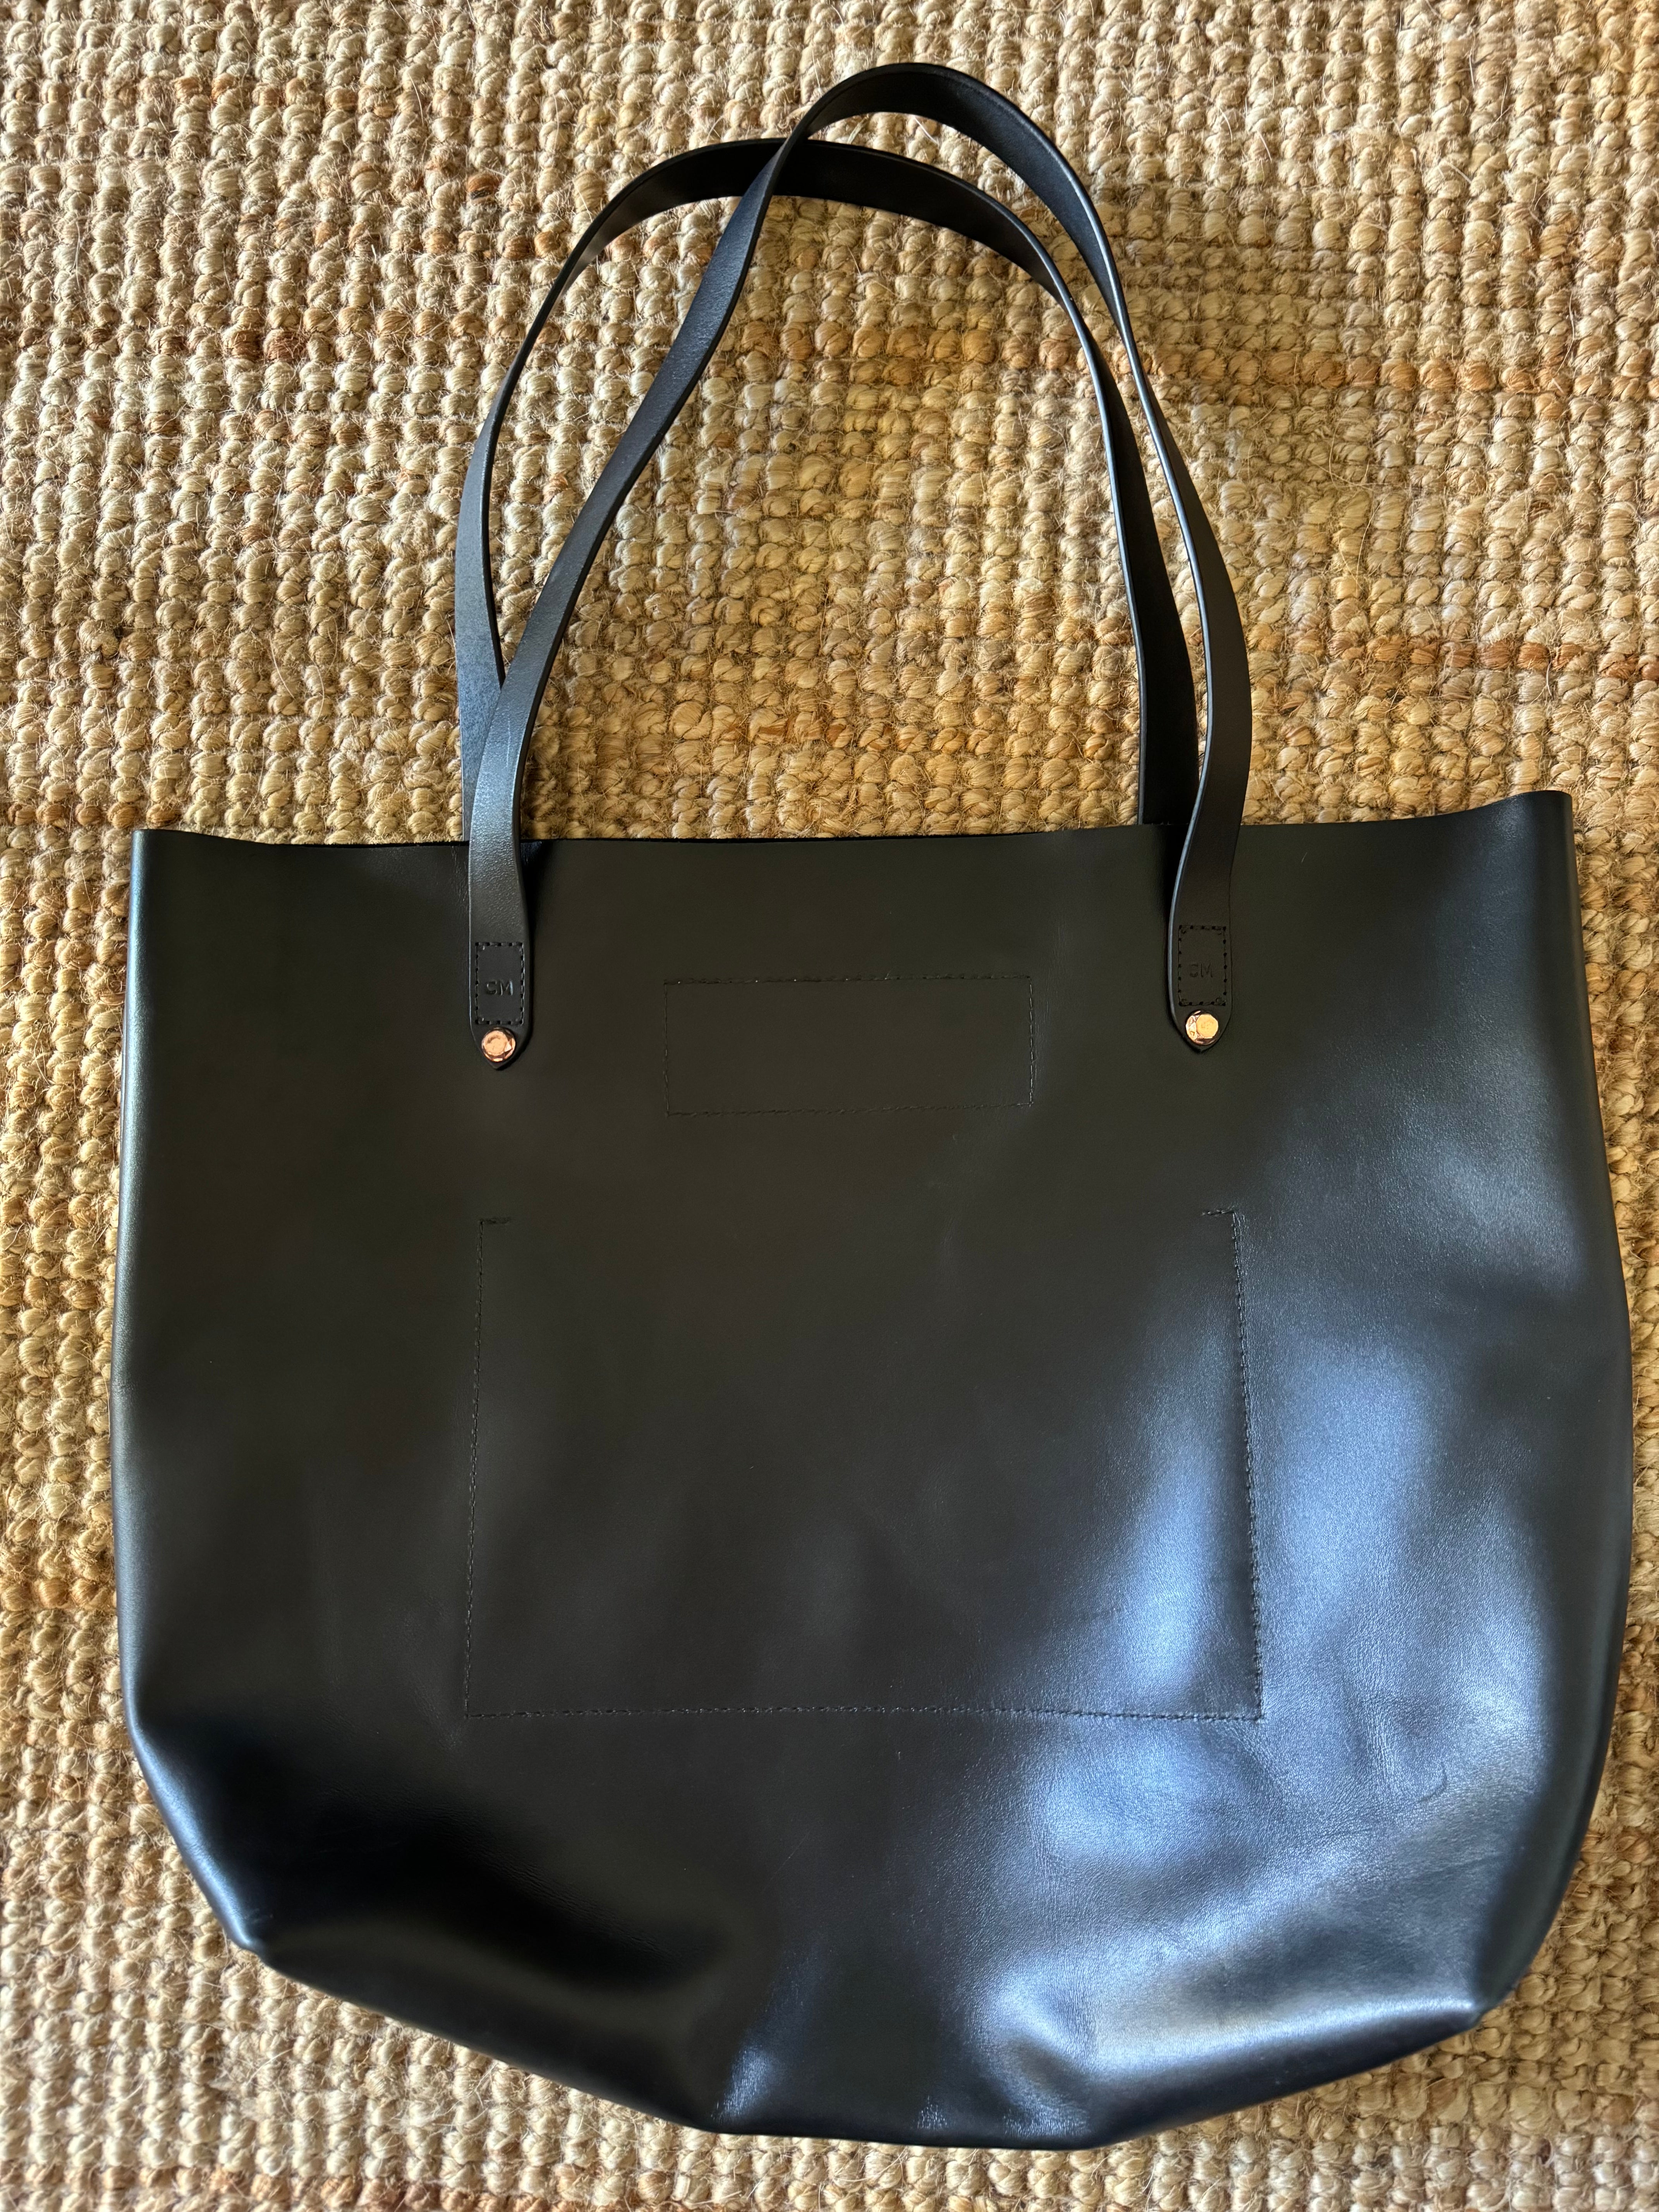 Pre-loved Willow Bespoke Tote